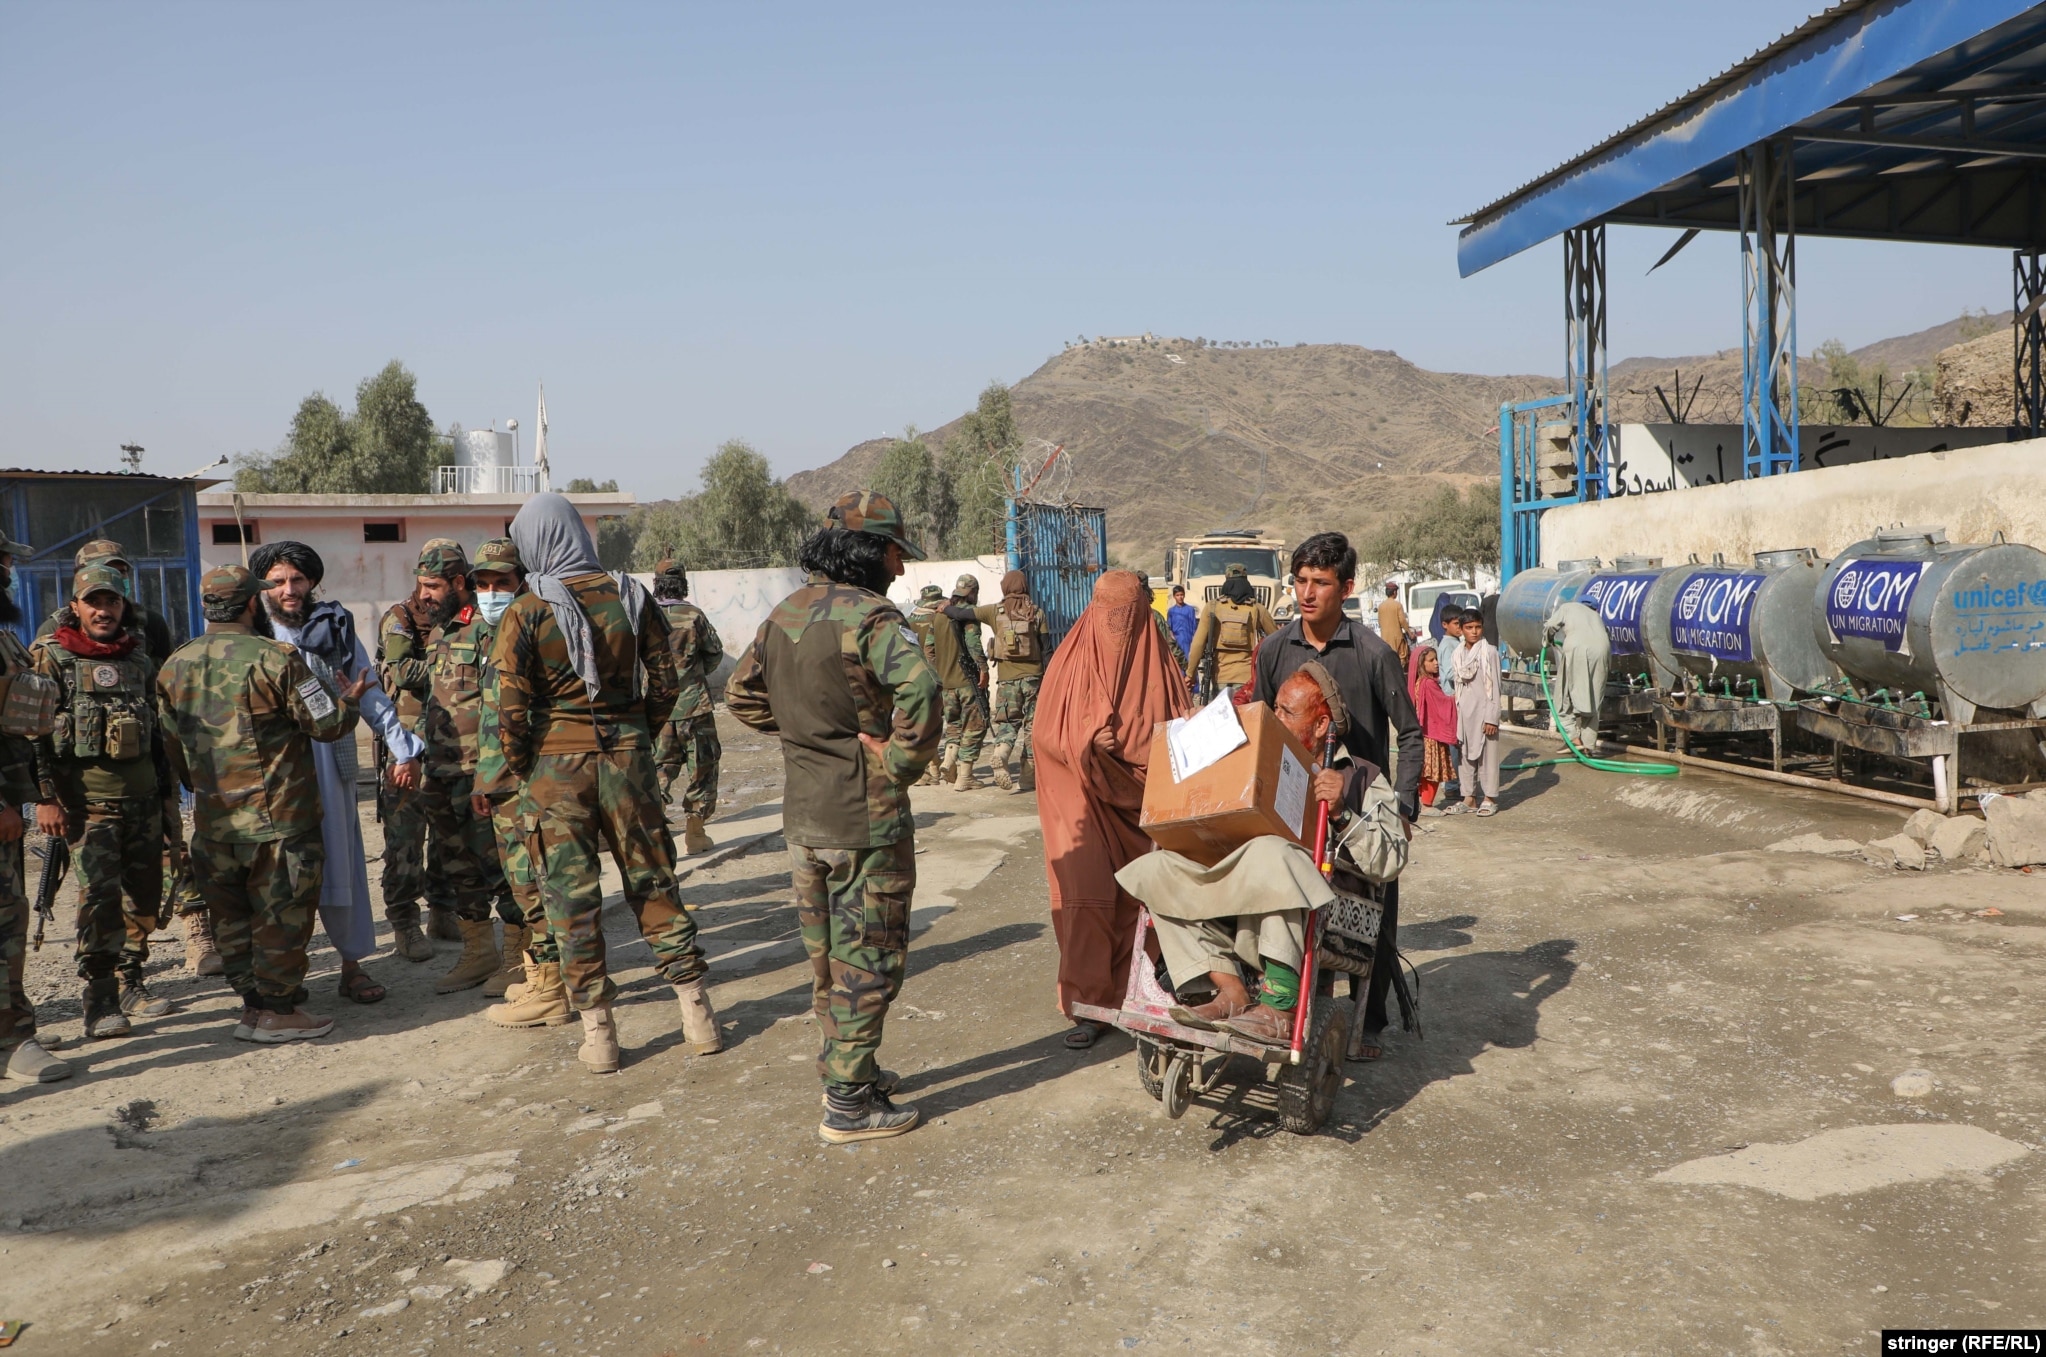 The hard-line Islamists are also&nbsp;setting up&nbsp;additional temporary camps for the returnees, including in the southern province of Uruzgan.